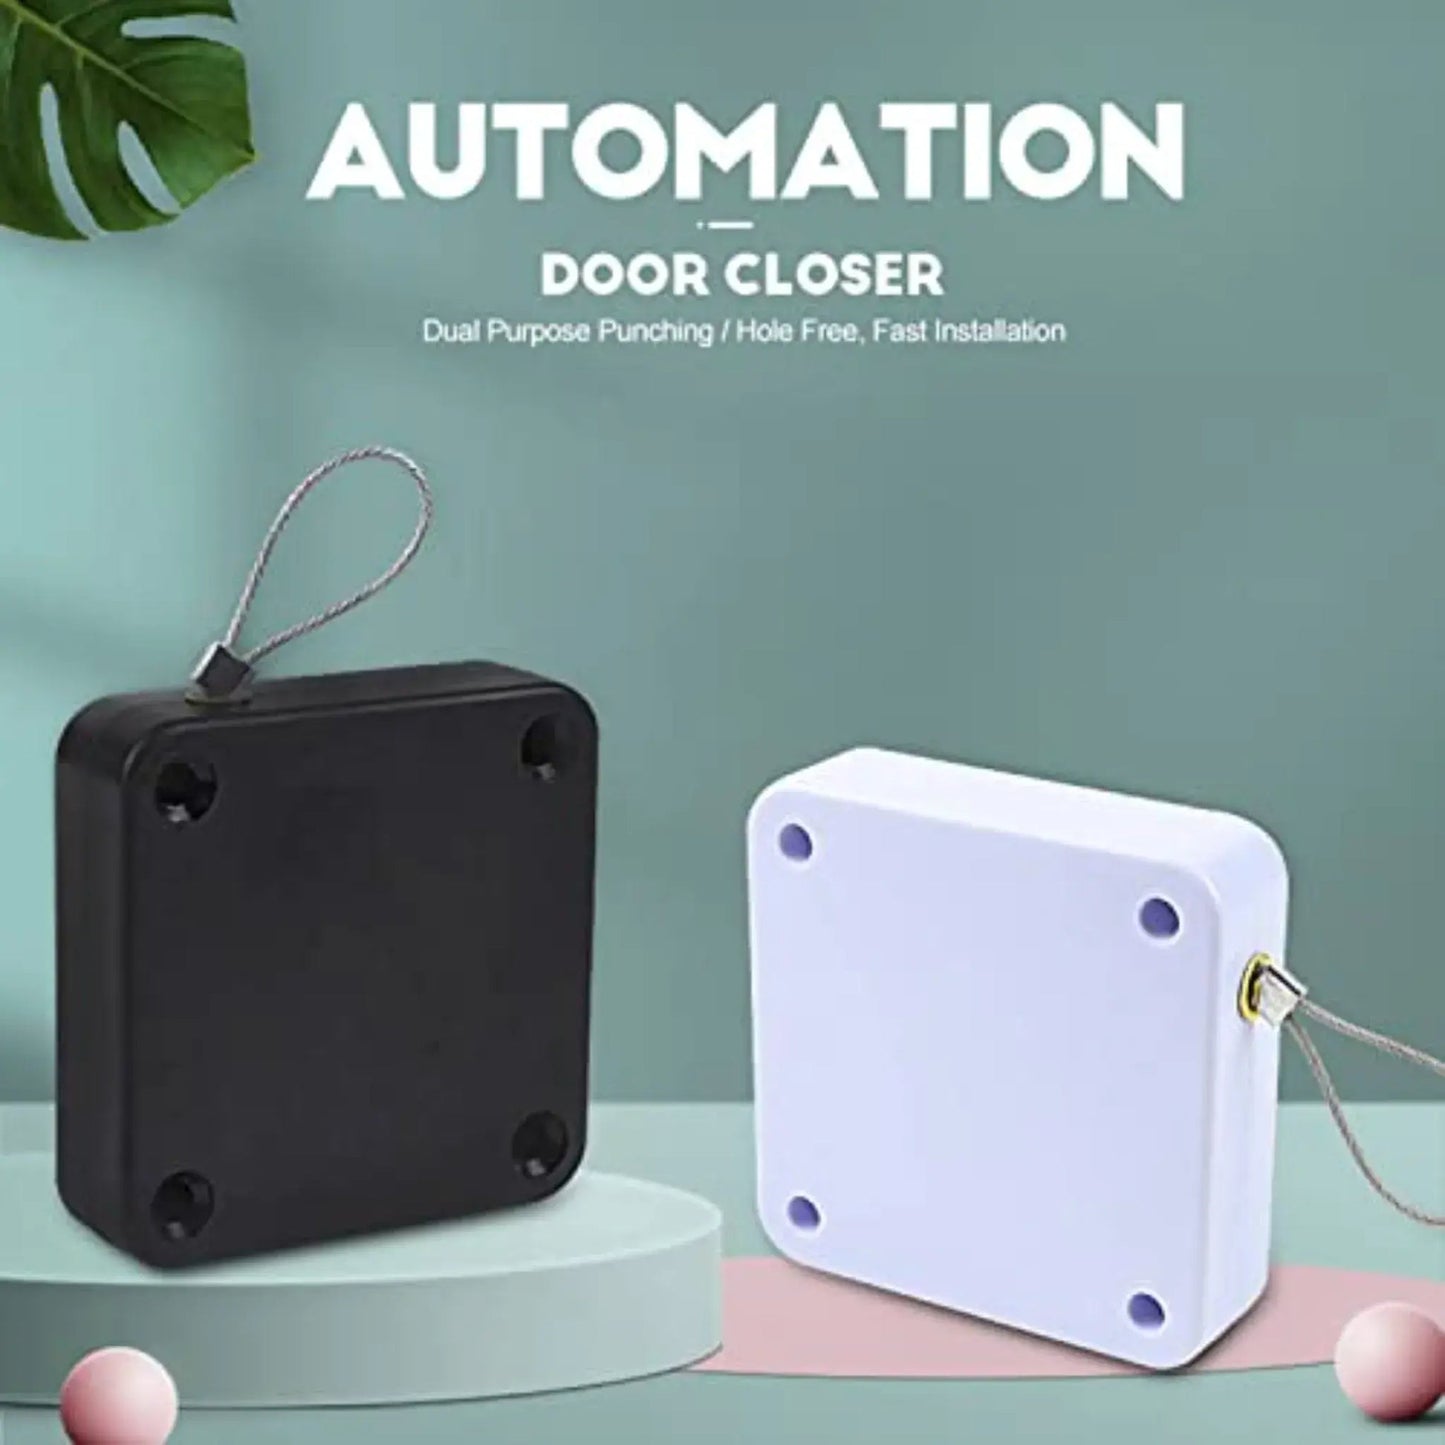 SALE - Punch-Free Automatic Door Closer | BUY 1 GET 1 FREE